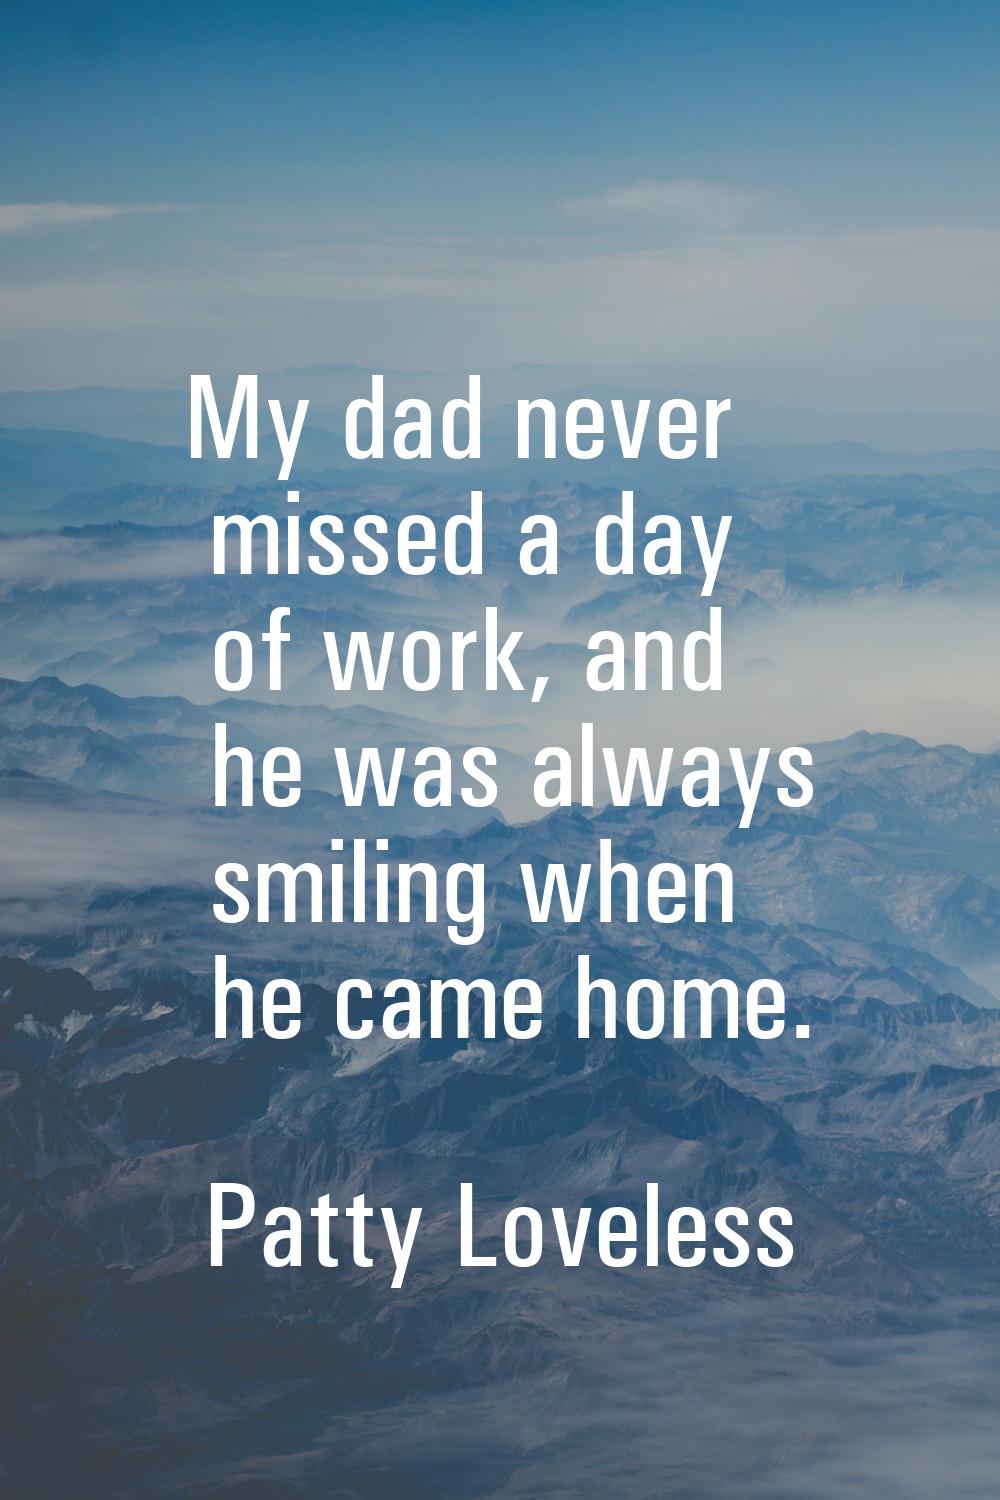 My dad never missed a day of work, and he was always smiling when he came home.